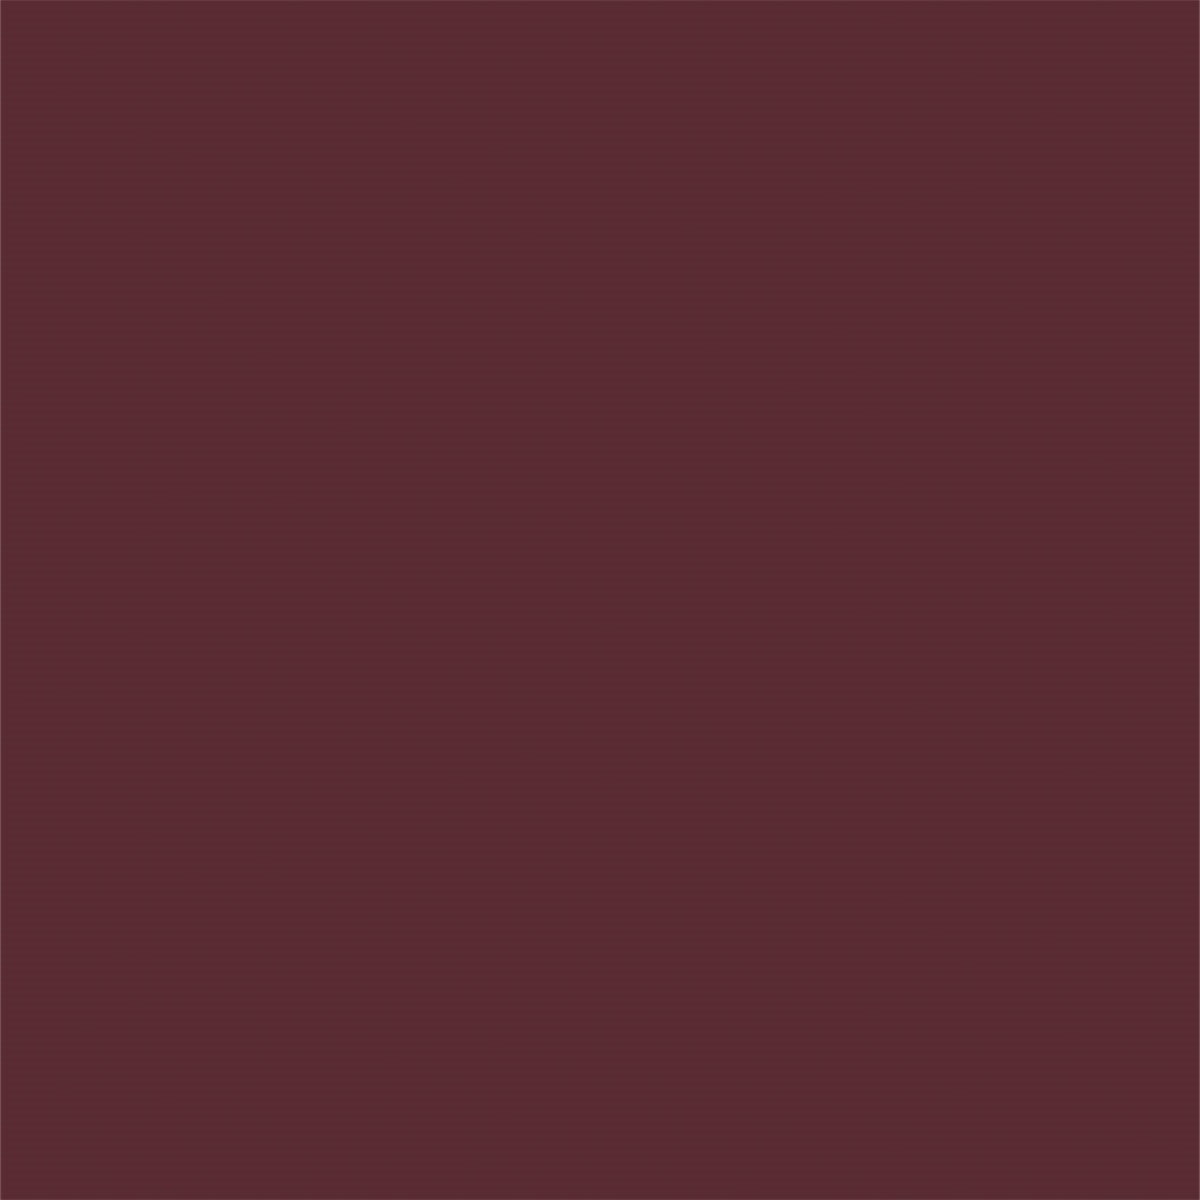 Burgundy Solid Photography Backdrops